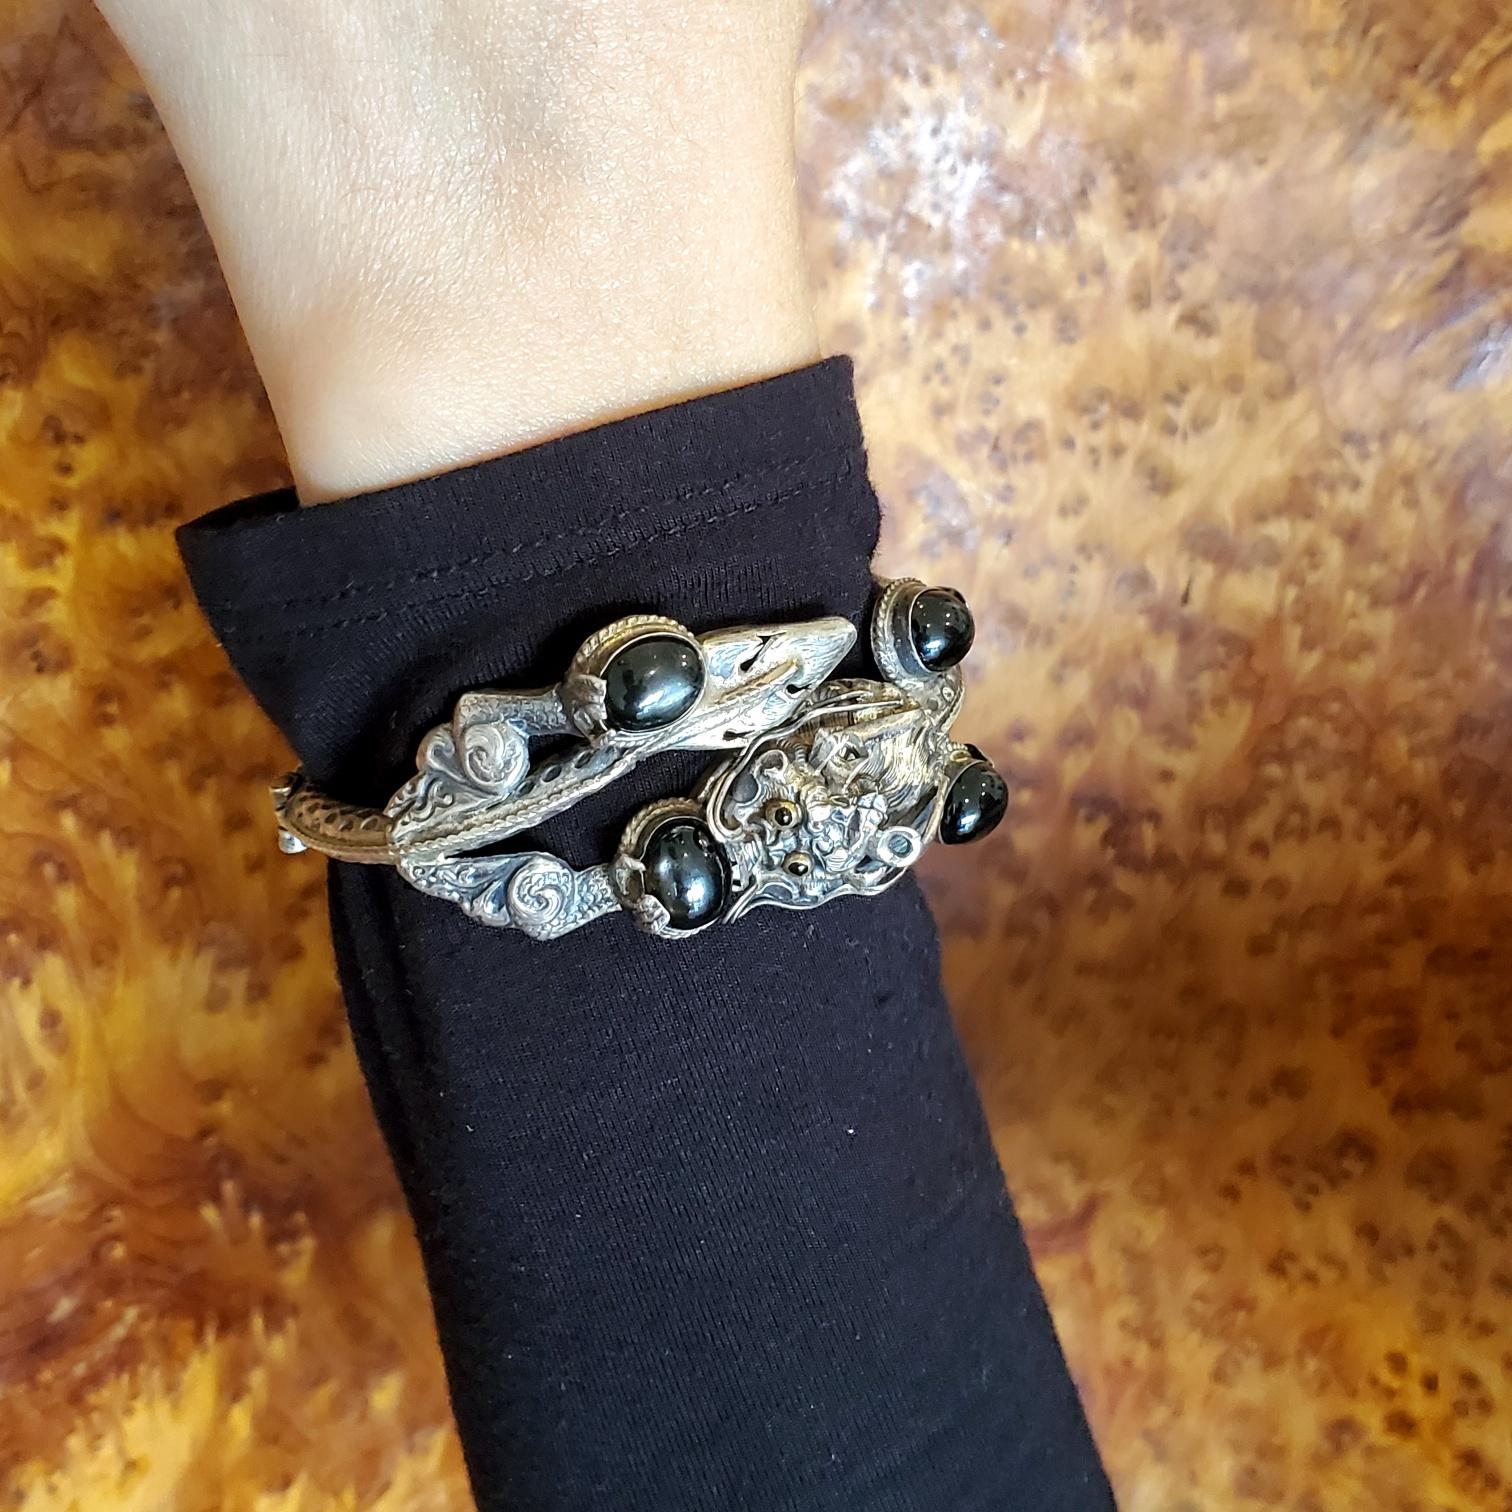 China 1900 Export Dragon Bracelet in 925 Sterling Silver with Cat's Eye Obsidian 1